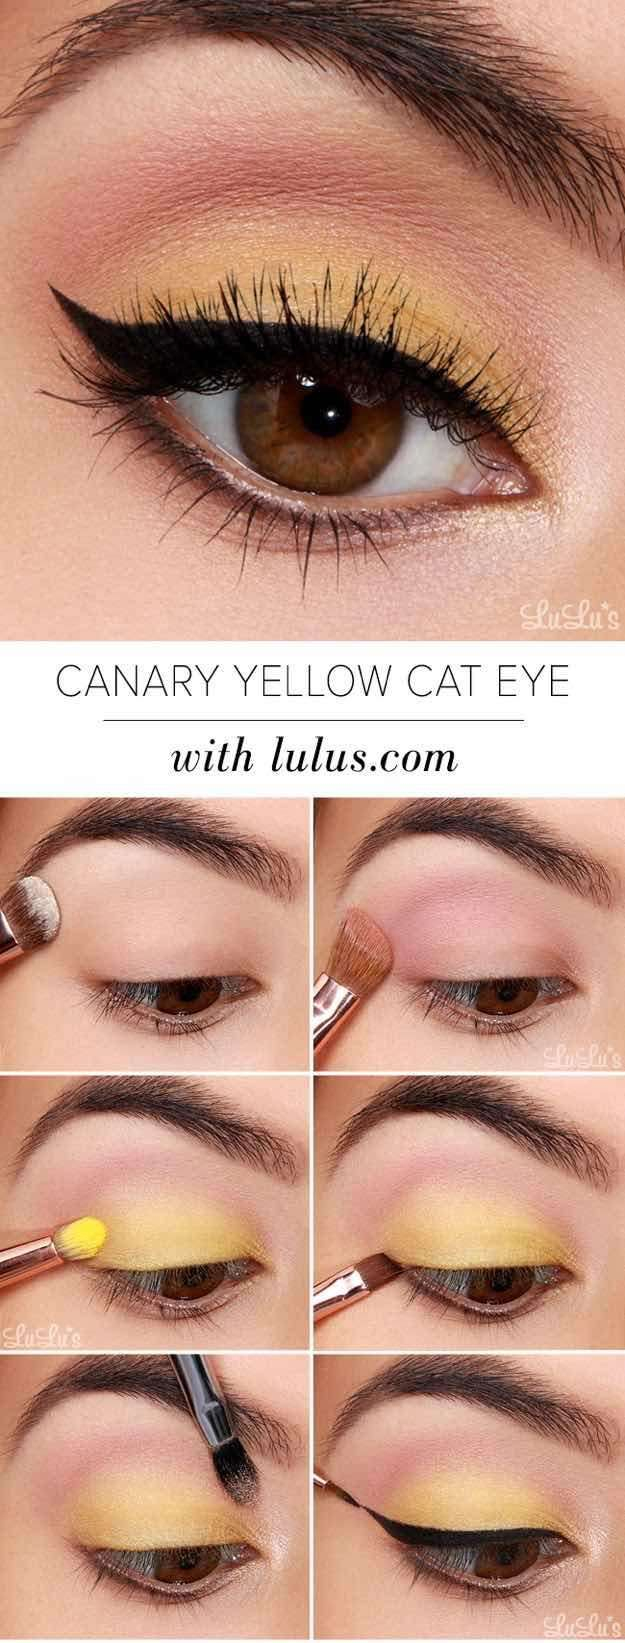 Yellow And Black Eye Makeup Best Ideas For Makeup Tutorials Yellow Shadow With Black Flick